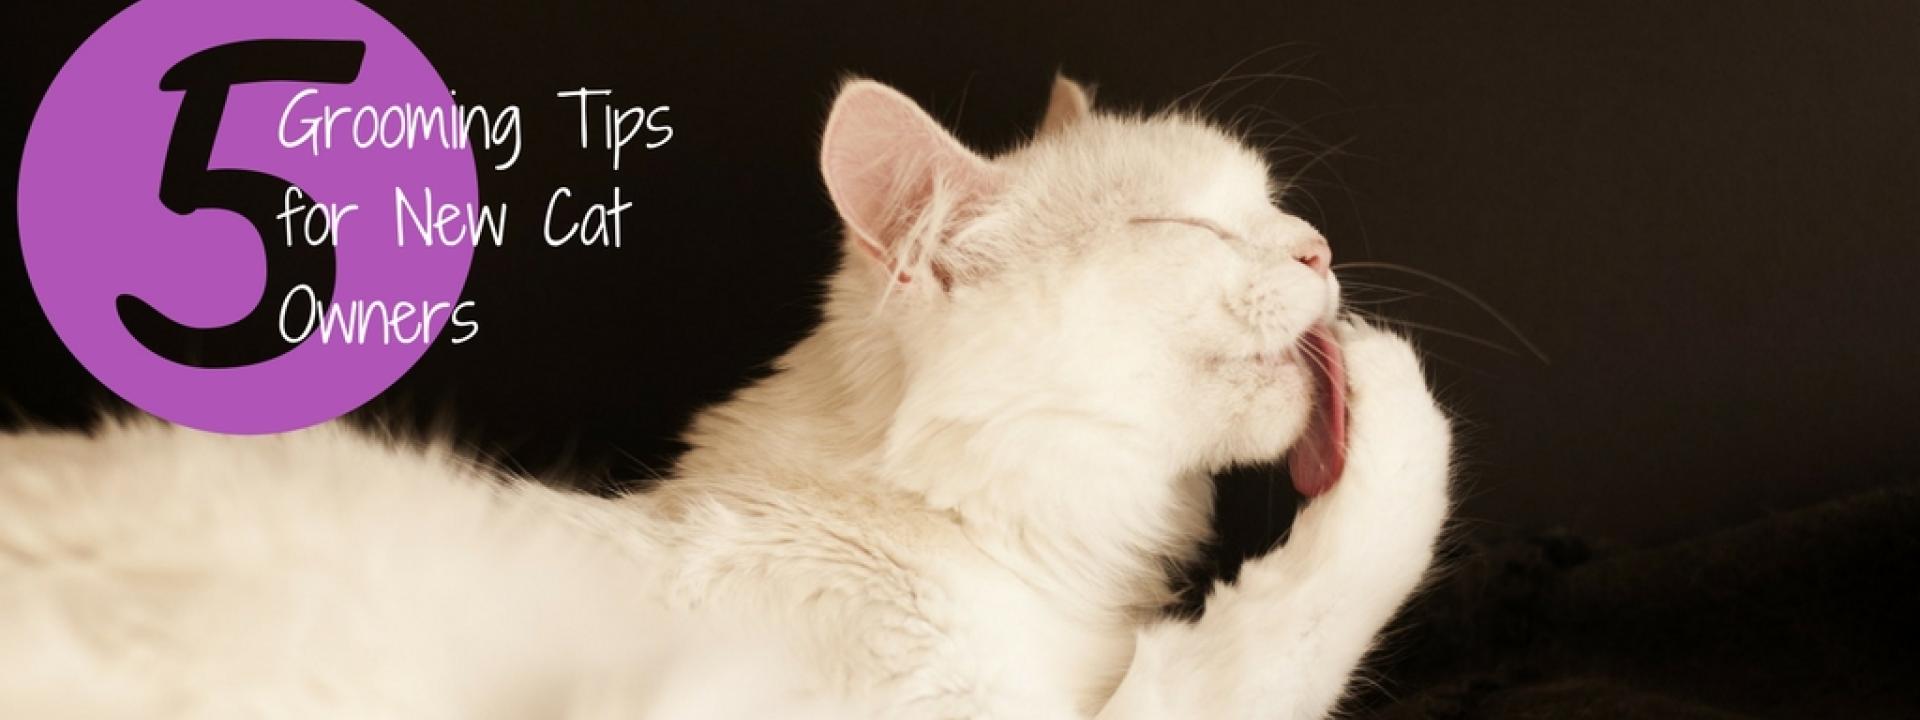 5 Grooming Tips for New Cat Owners